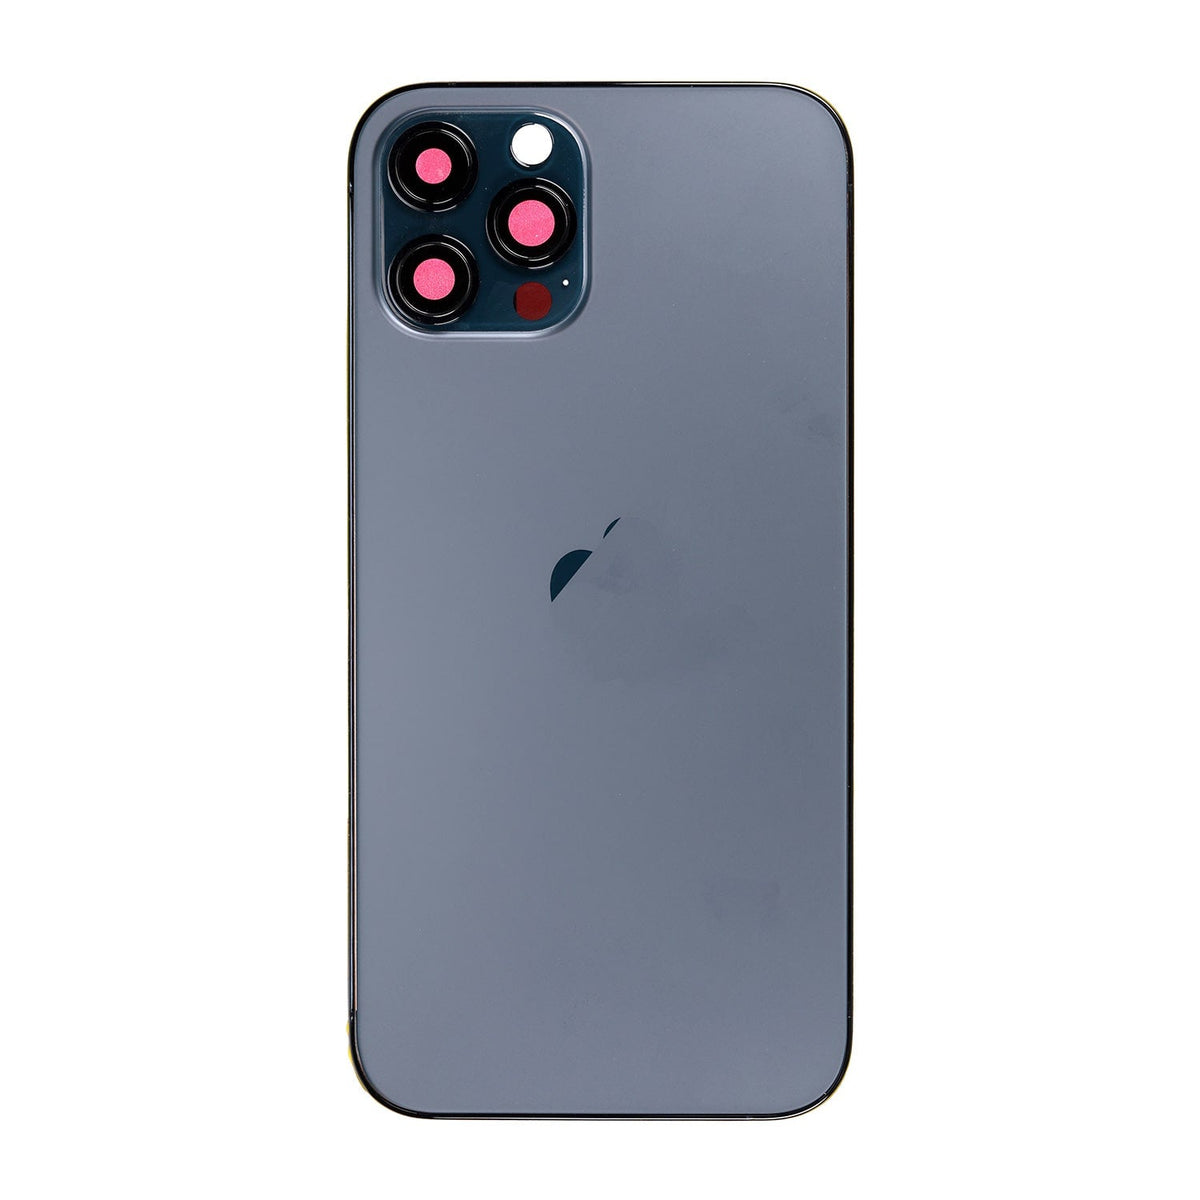 PACIFIC BLUE REAR HOUSING WITH FRAME FOR IPHONE 12 PRO MAX